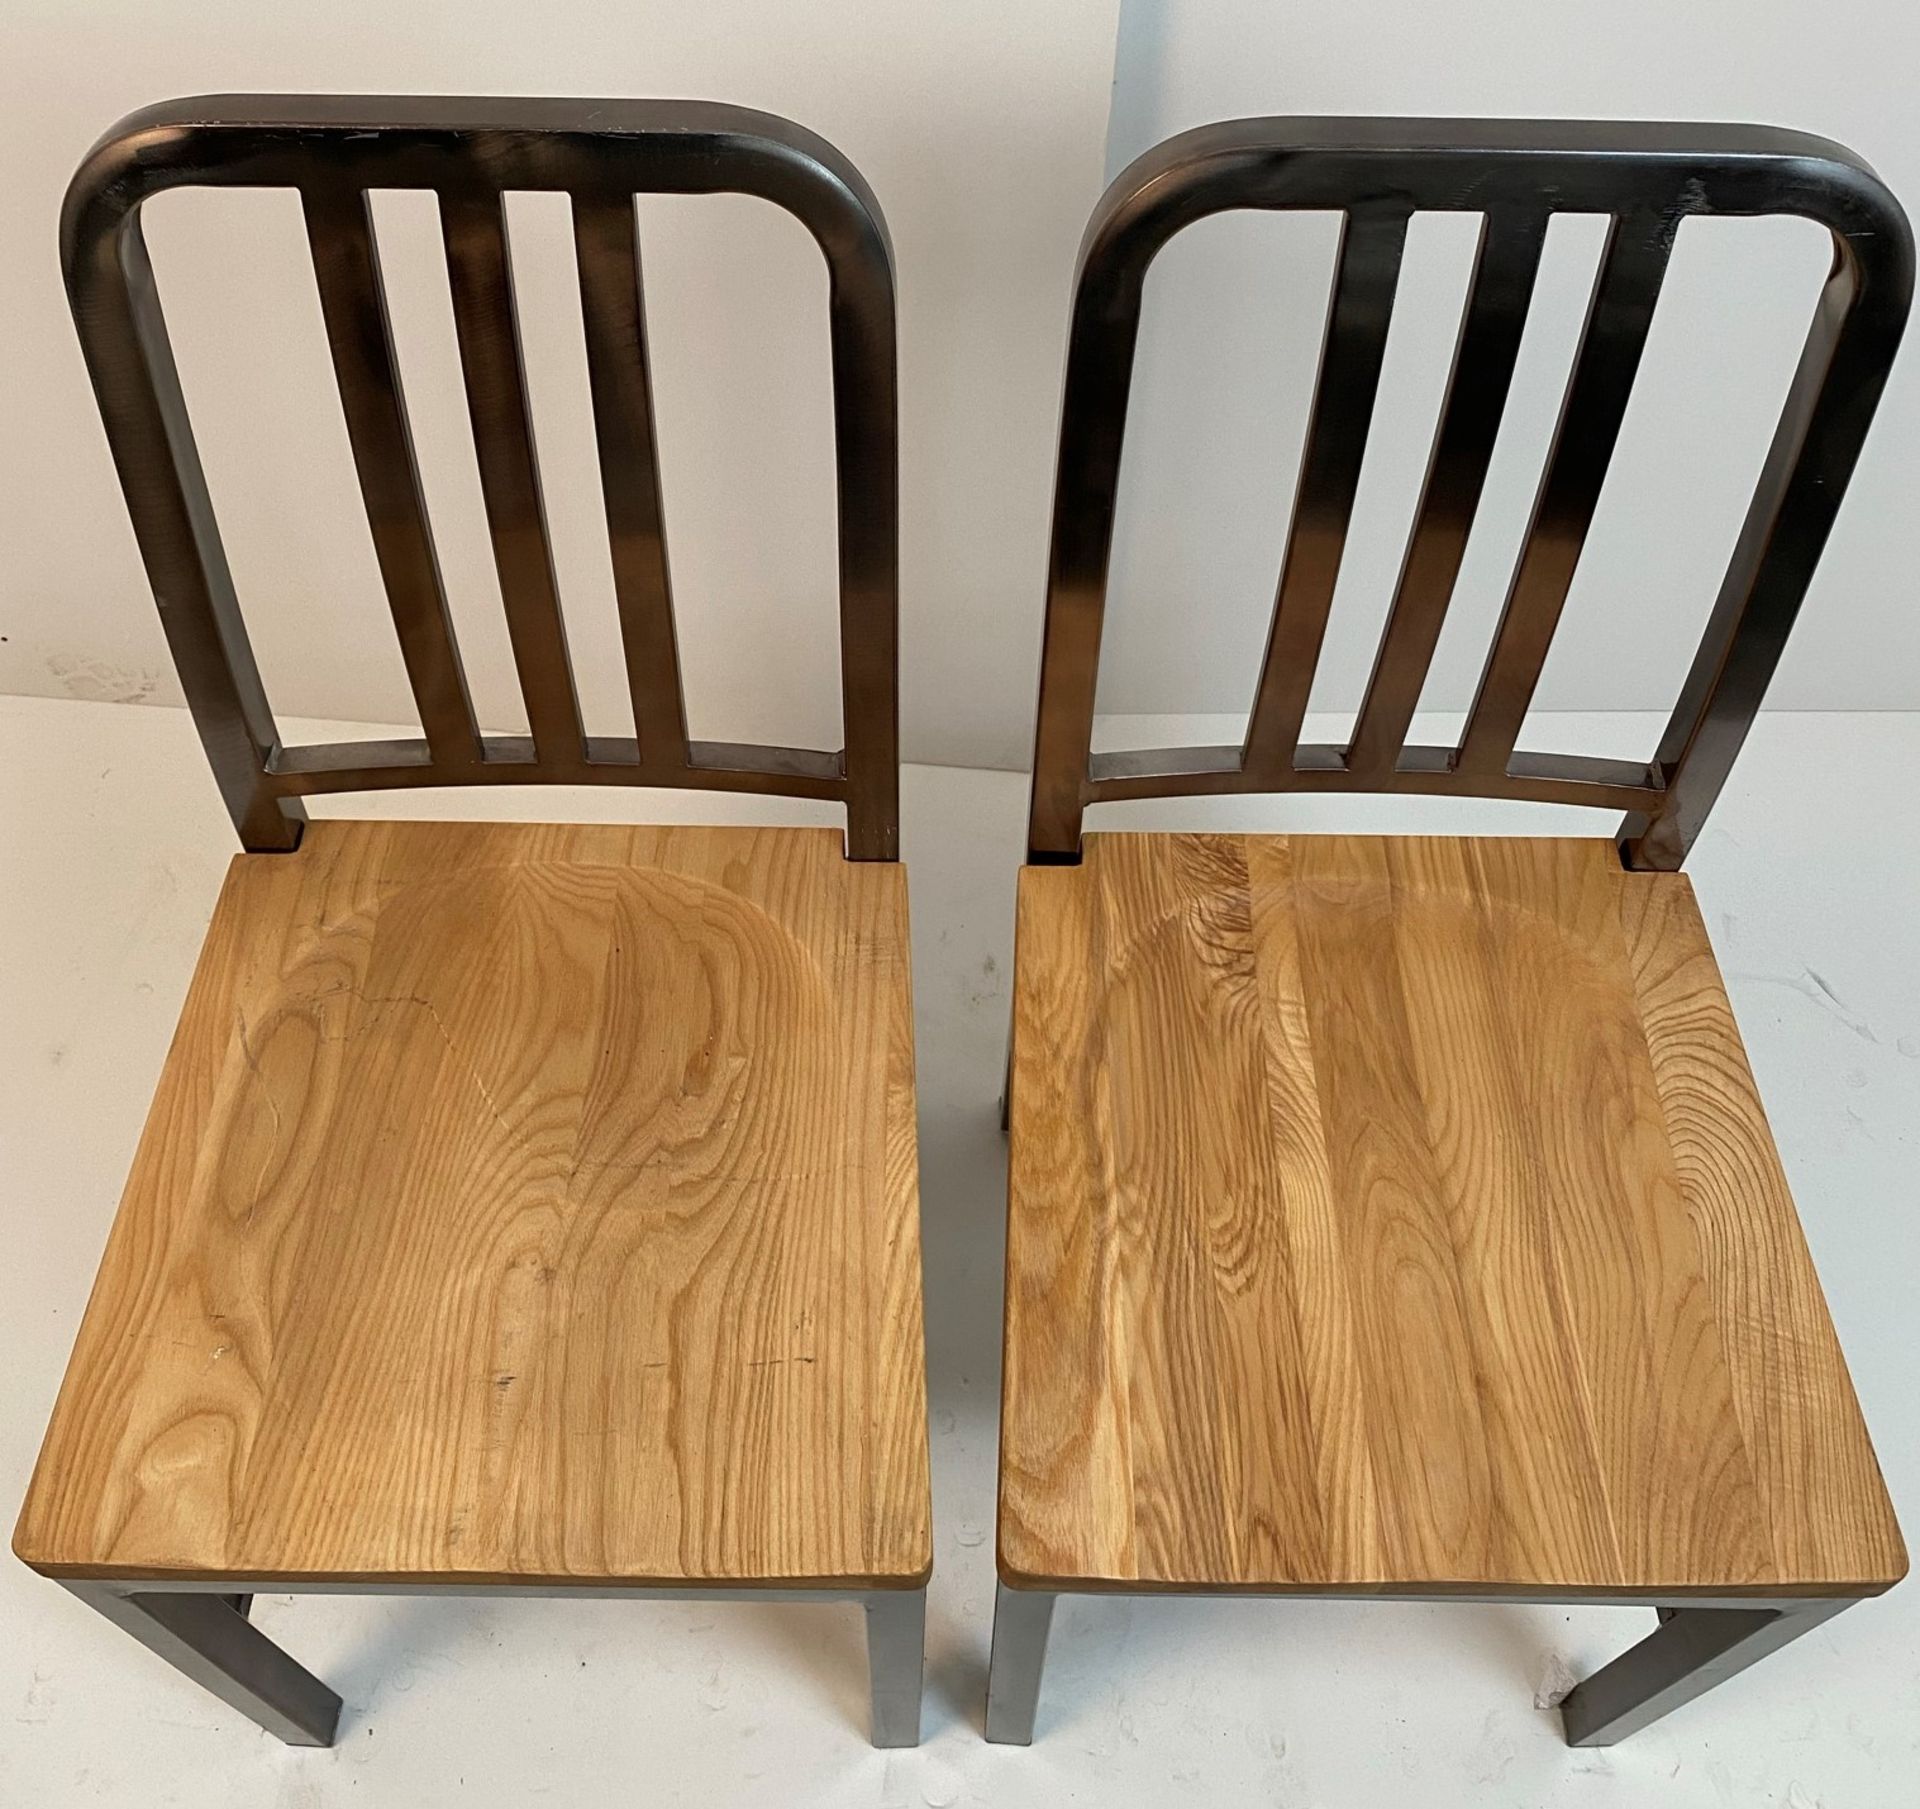 2 x Gun Metal Brushed Metal Framed Chairs with Wooden Seats - Image 2 of 2